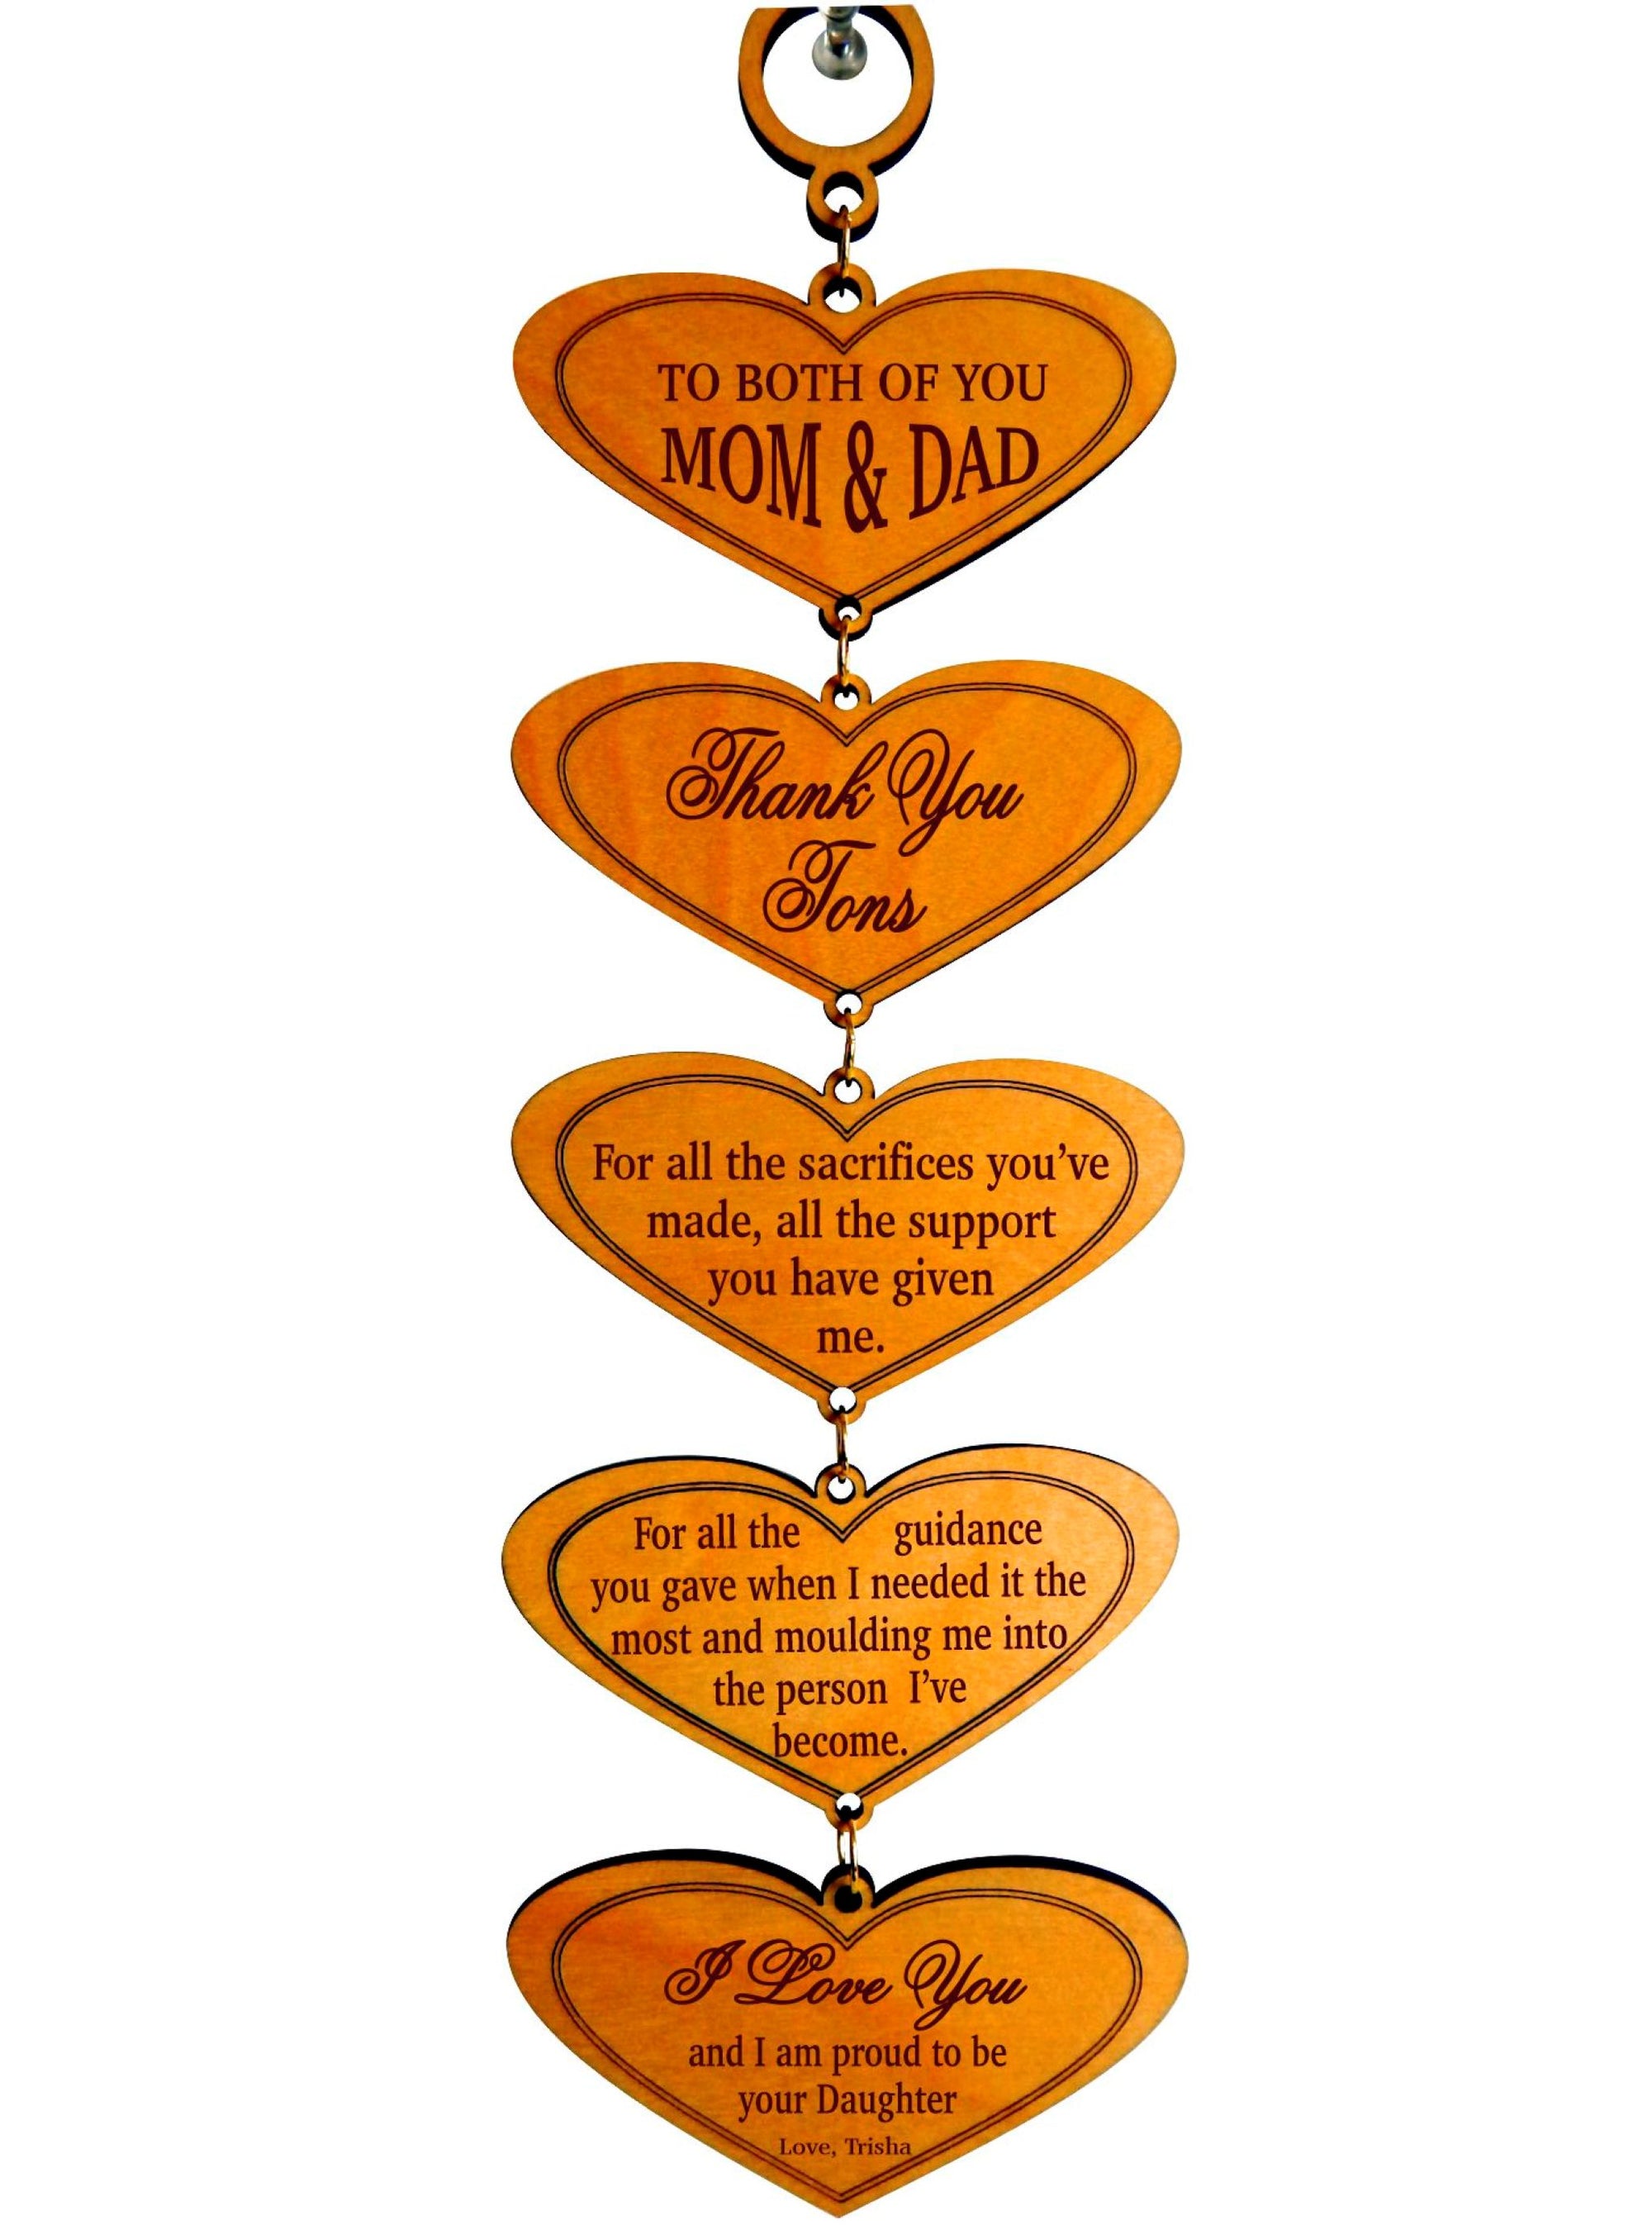 Thank you Gift for Mom and Dad | Parents Appreciation Gift | Personalized Wall Plaque